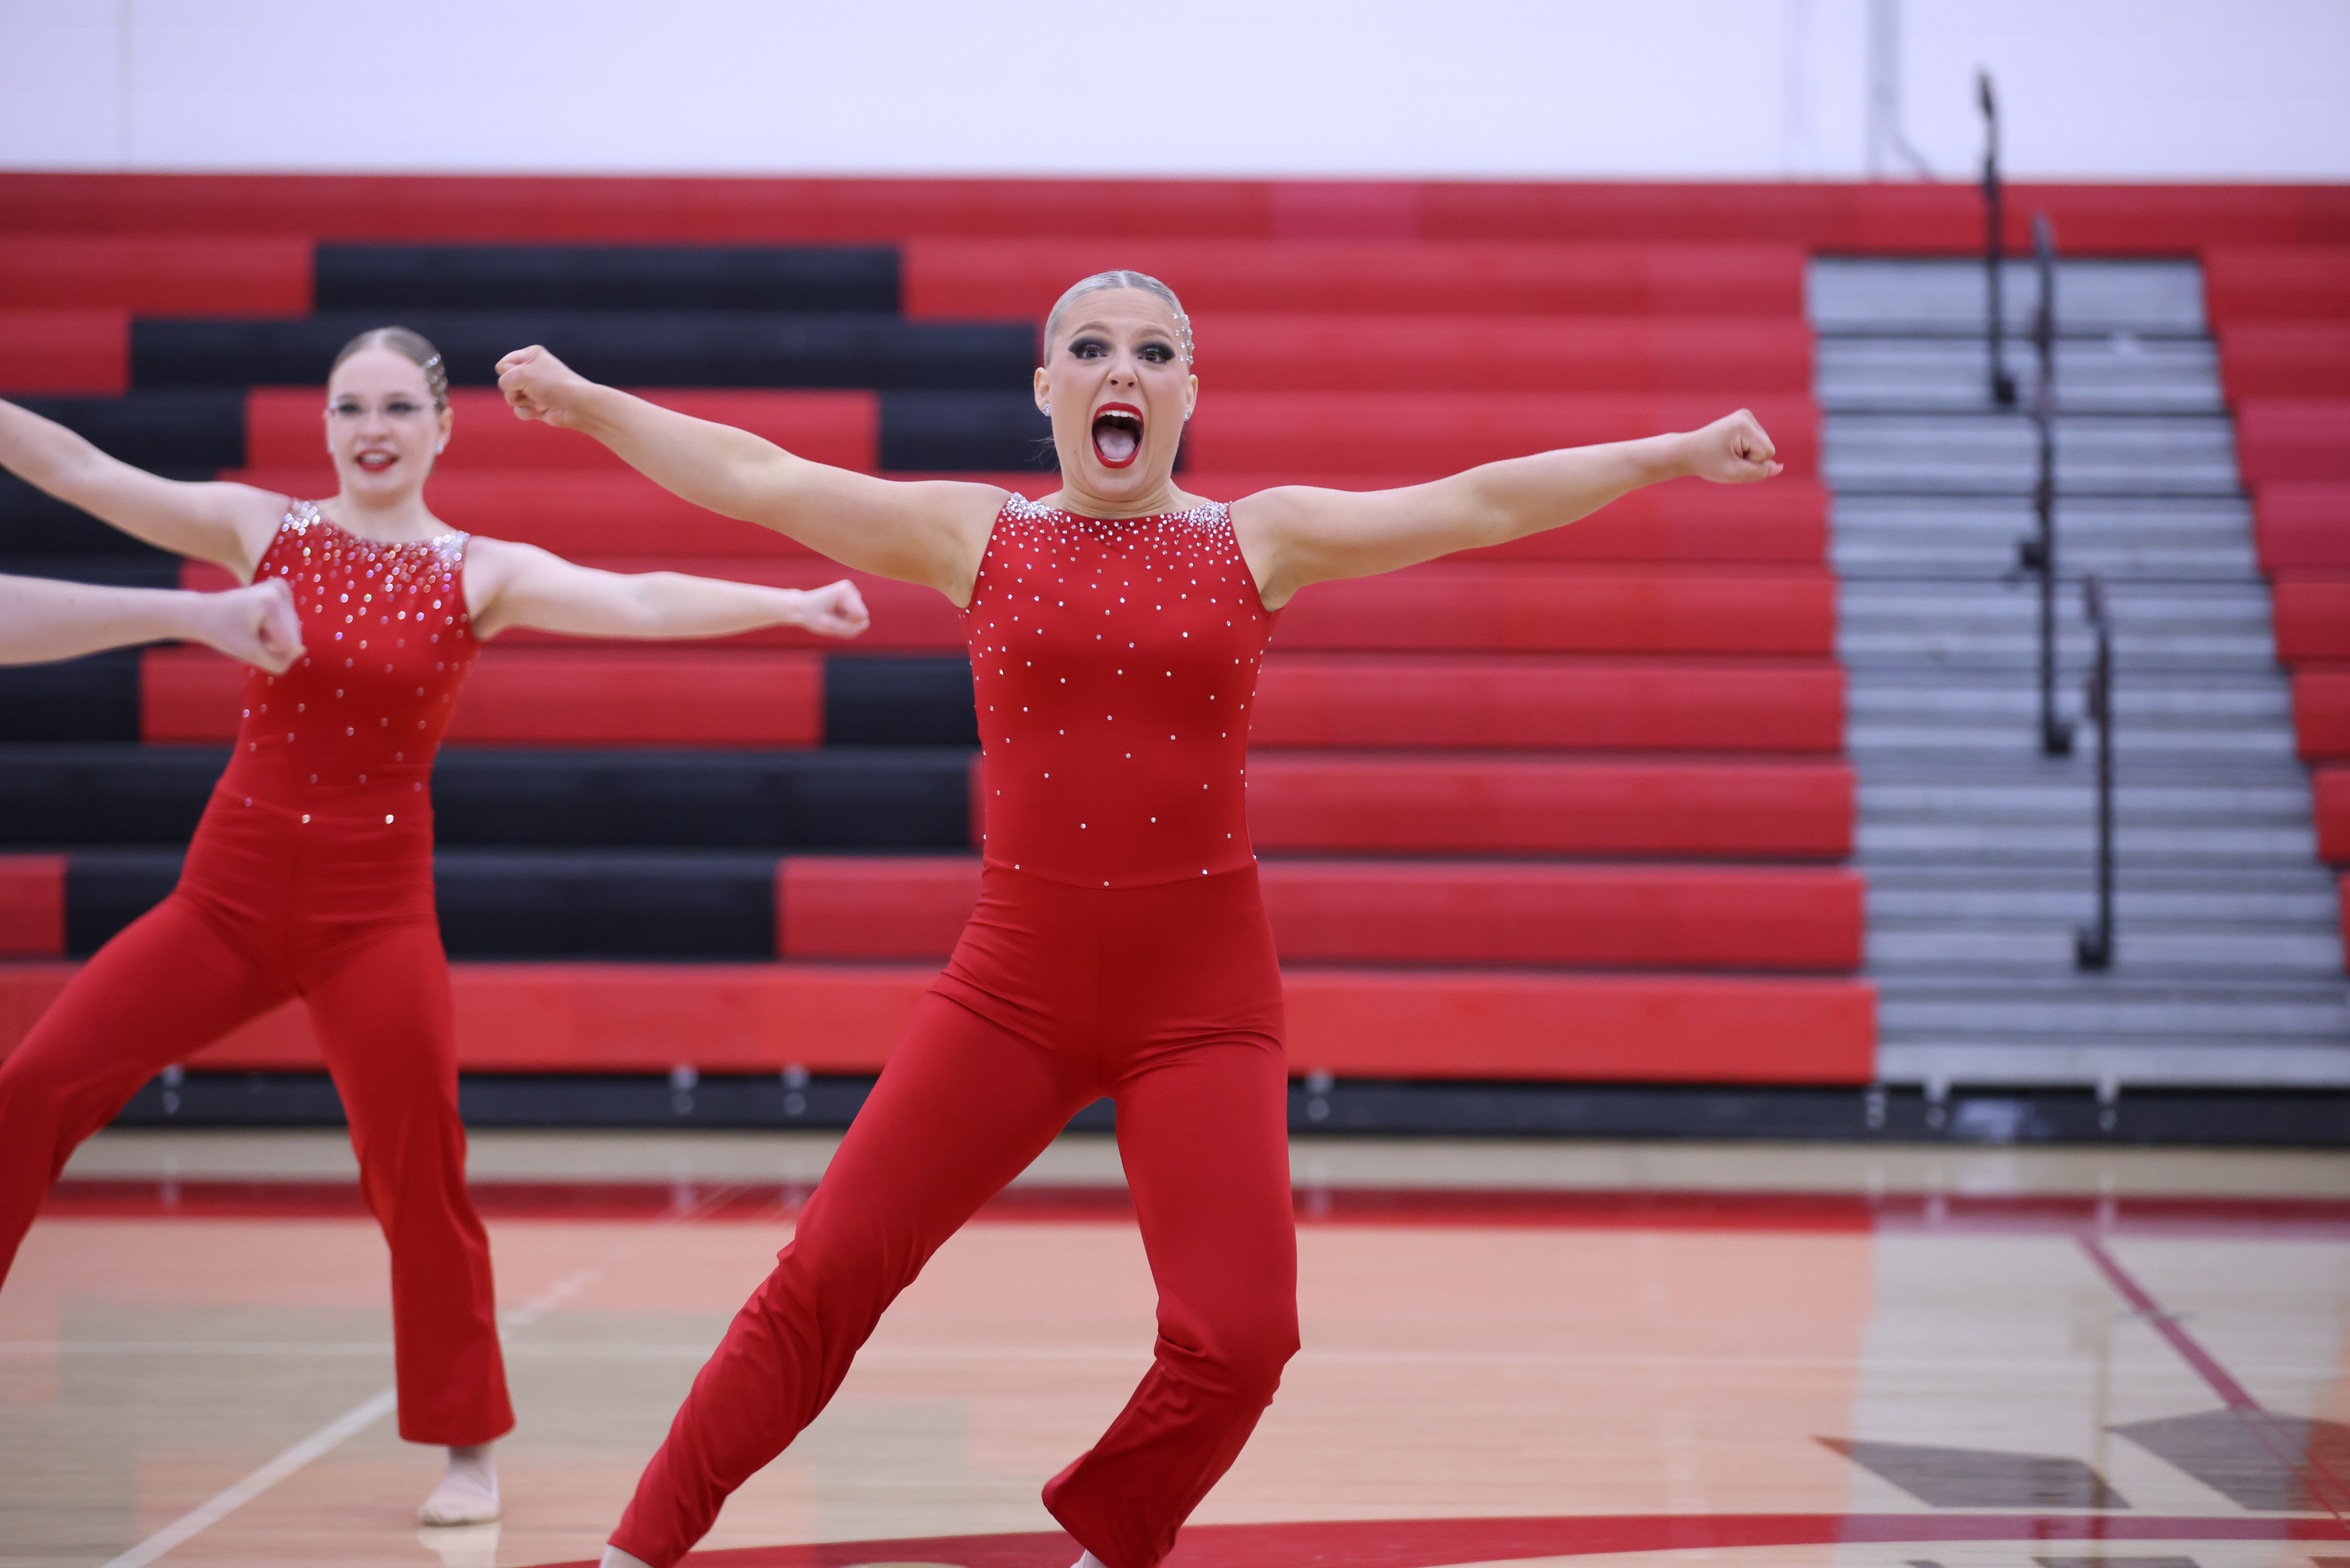 Dance finishes fourth at WHAC Championships; Koshowsky named Dancer of the Year, Burke Second Team